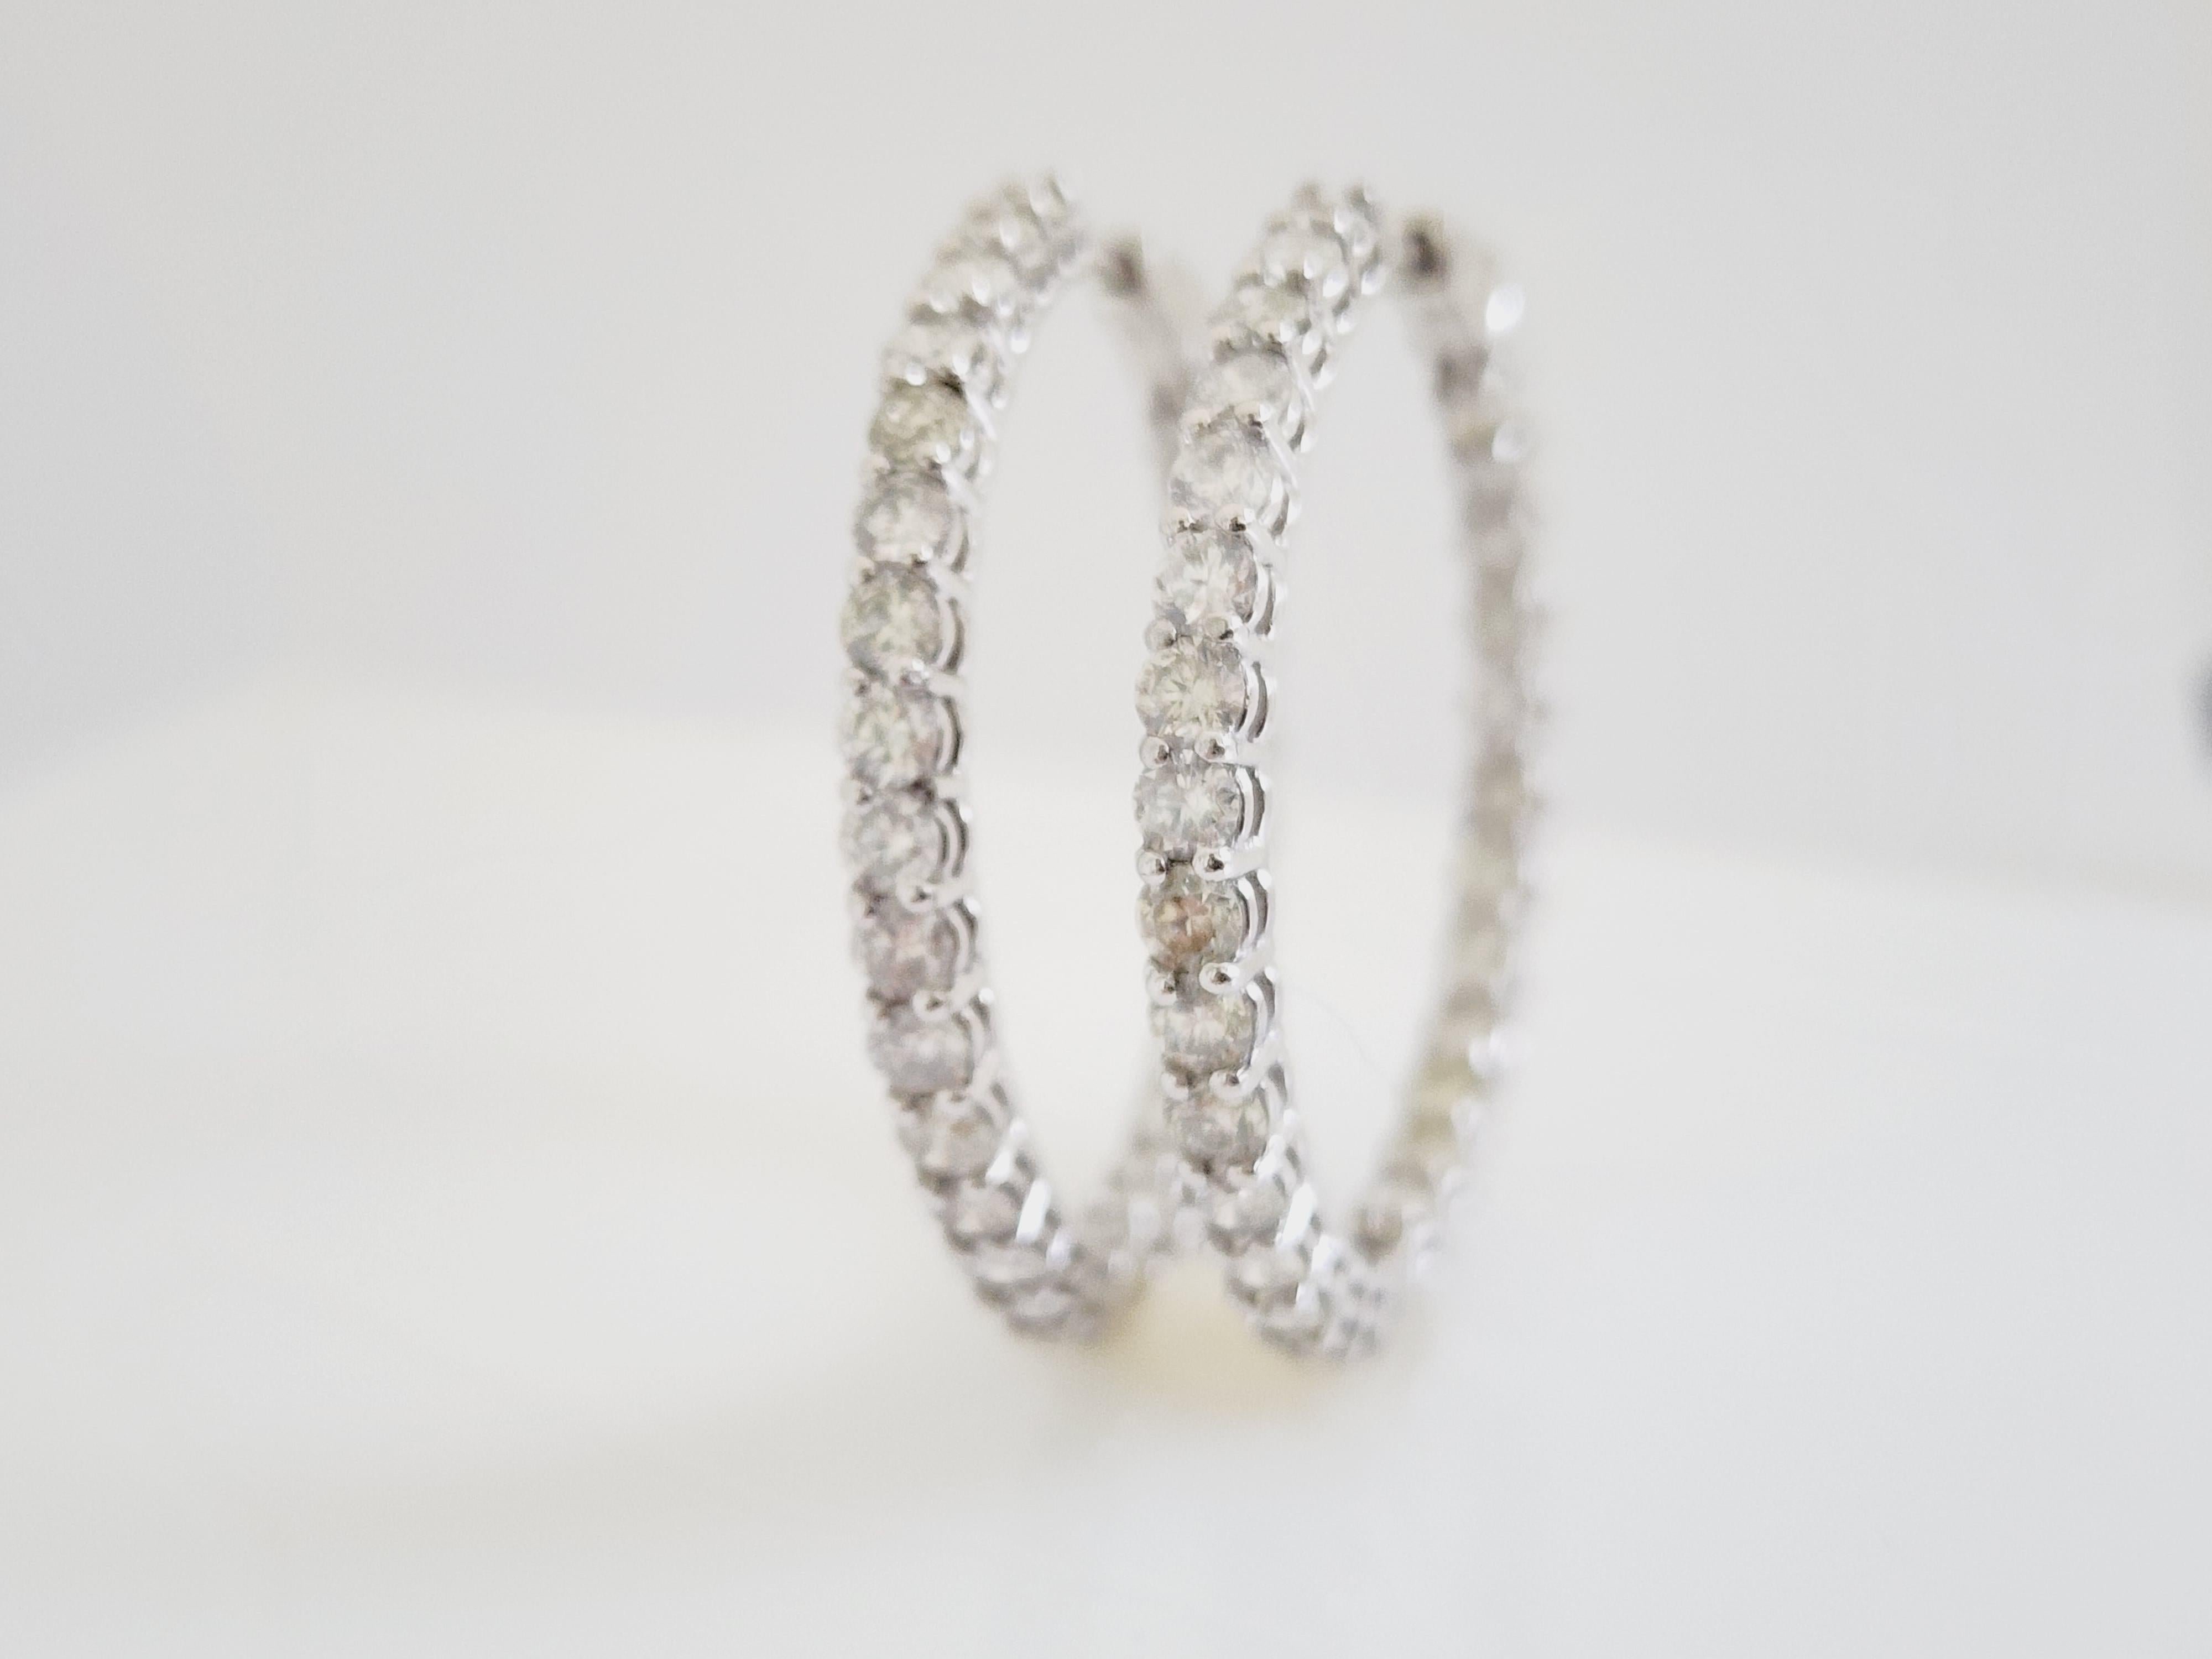 Beautiful pair of natural diamond inside out hoop earrings in 14K white gold. 
Secures with push snap closure for easy wear. 
Average Color HI, Clarity SI, 
Measures 1.25 inch diameter. 

*Free shipping within the U.S.*